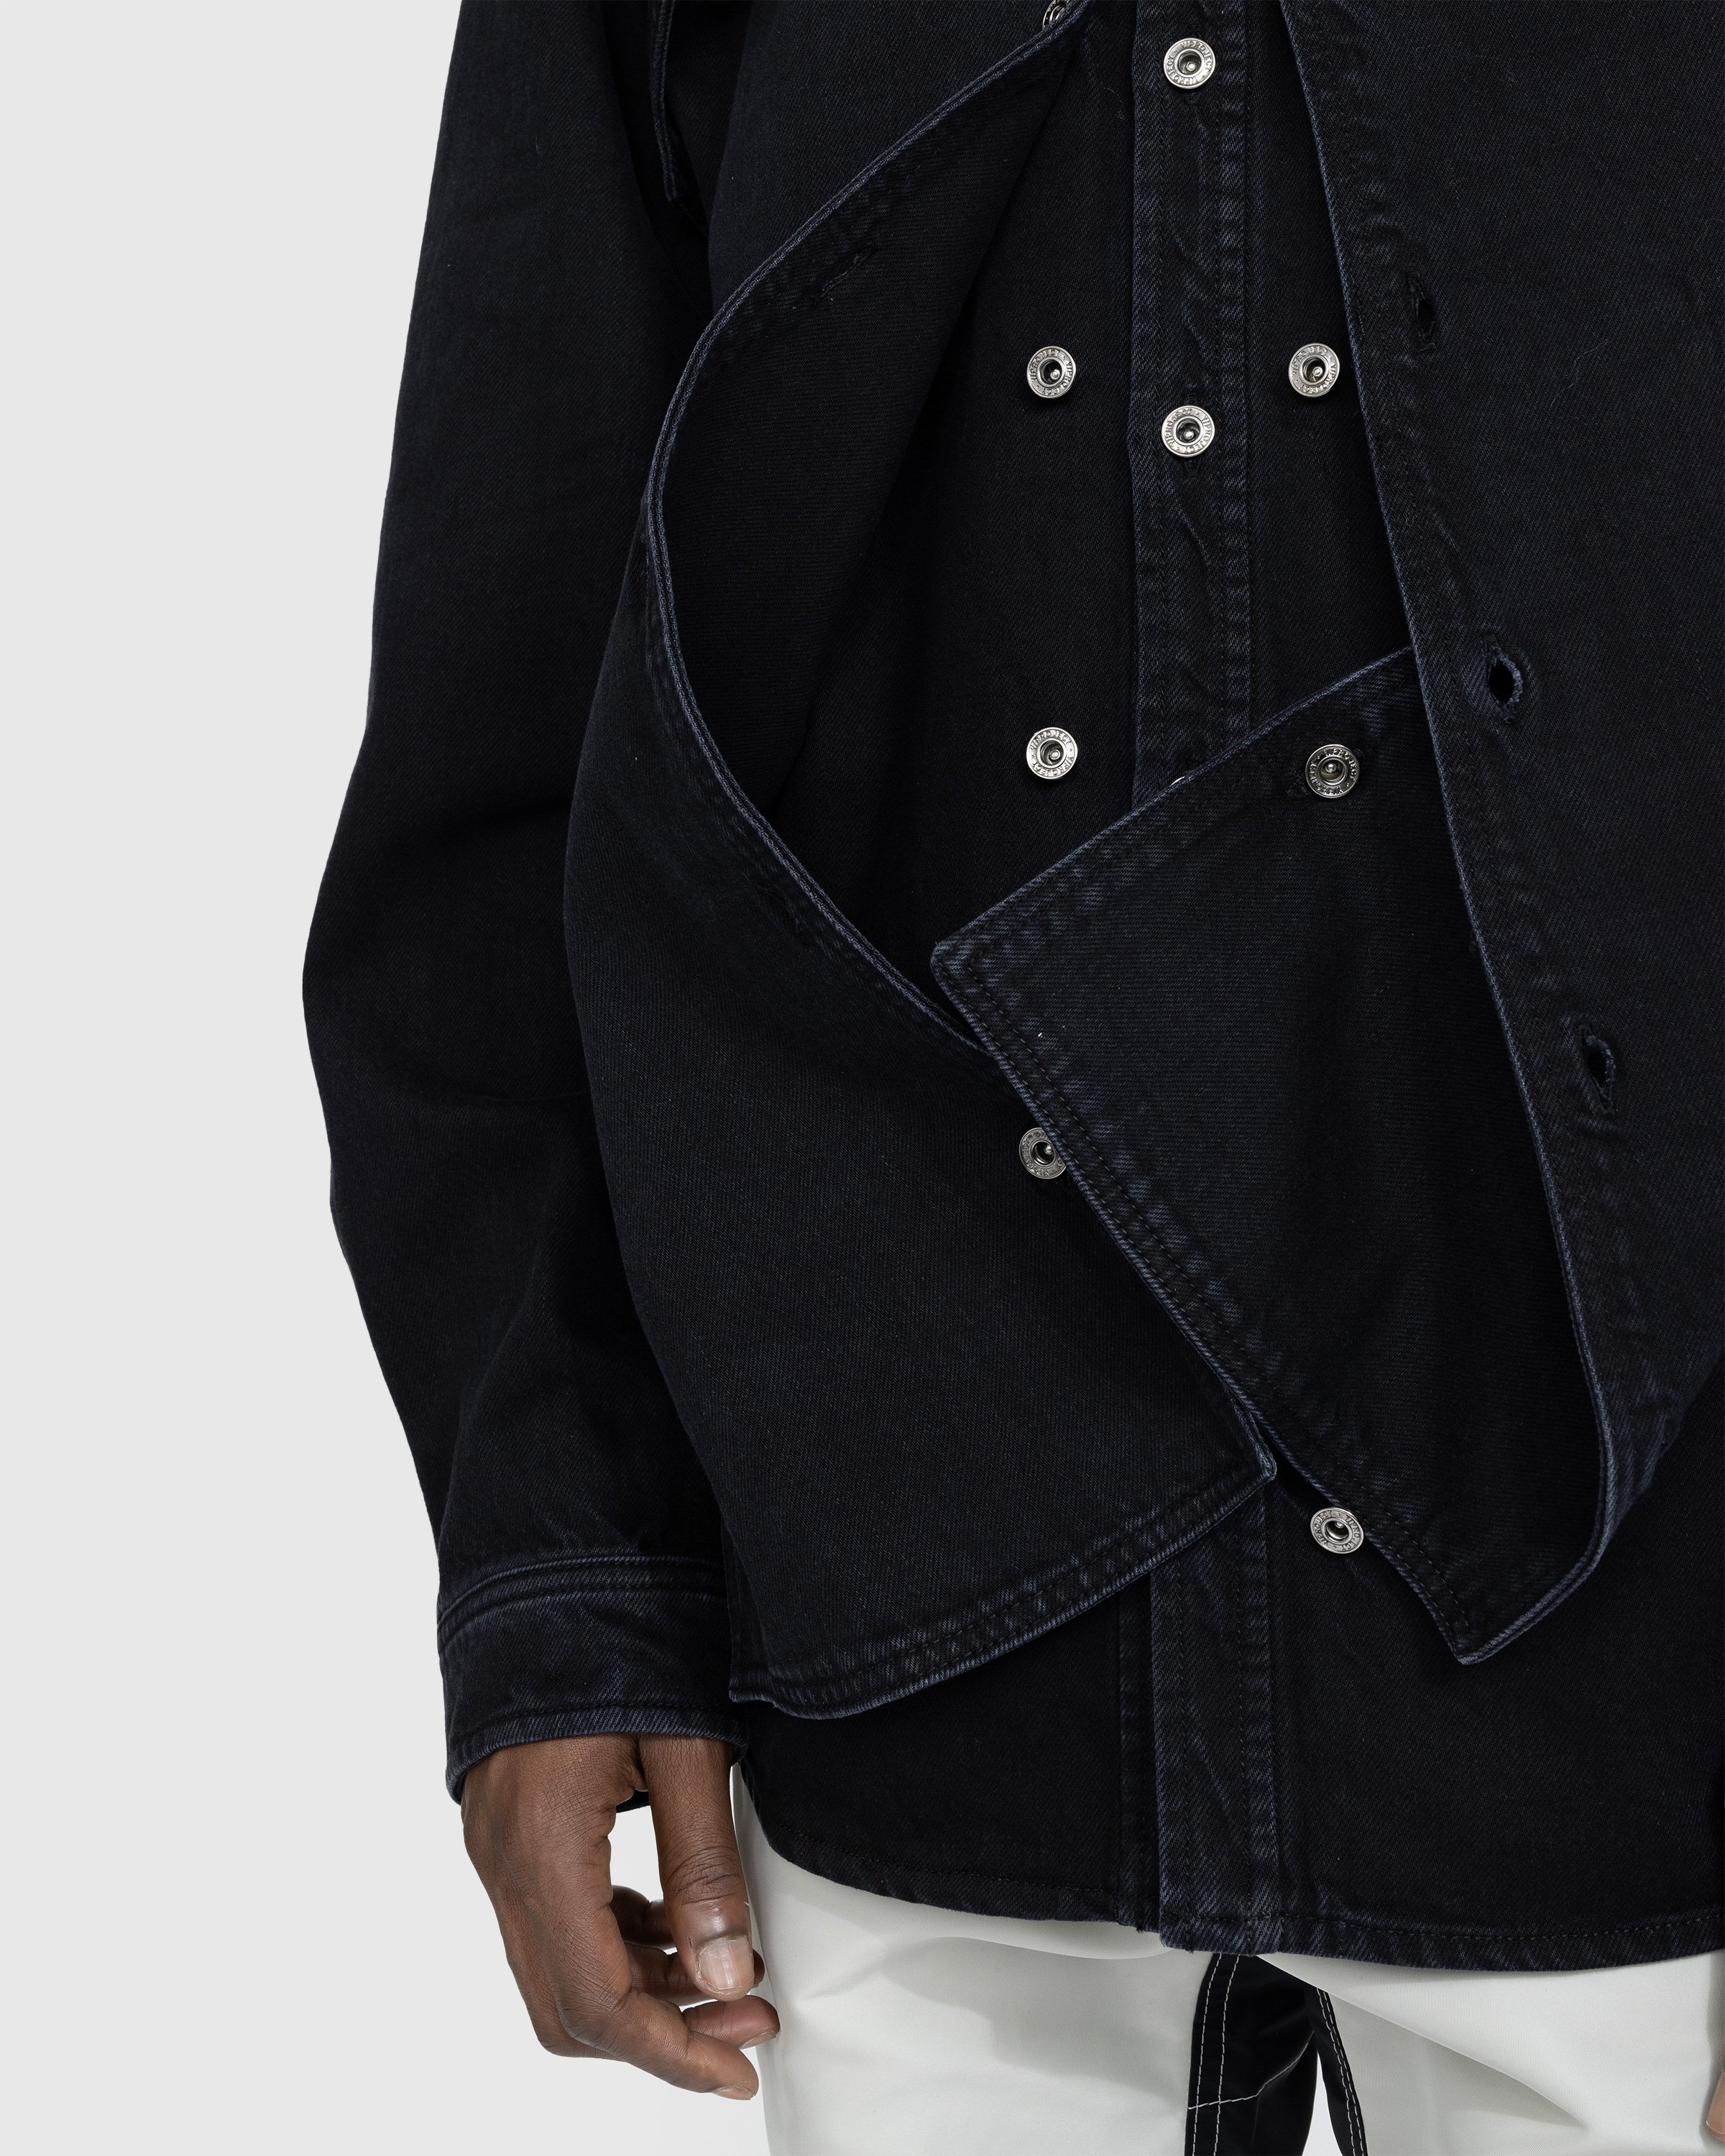 Y/Project - EVERGREEN SNAP OFF DENIM SHIRT - Clothing - Black - Image 5